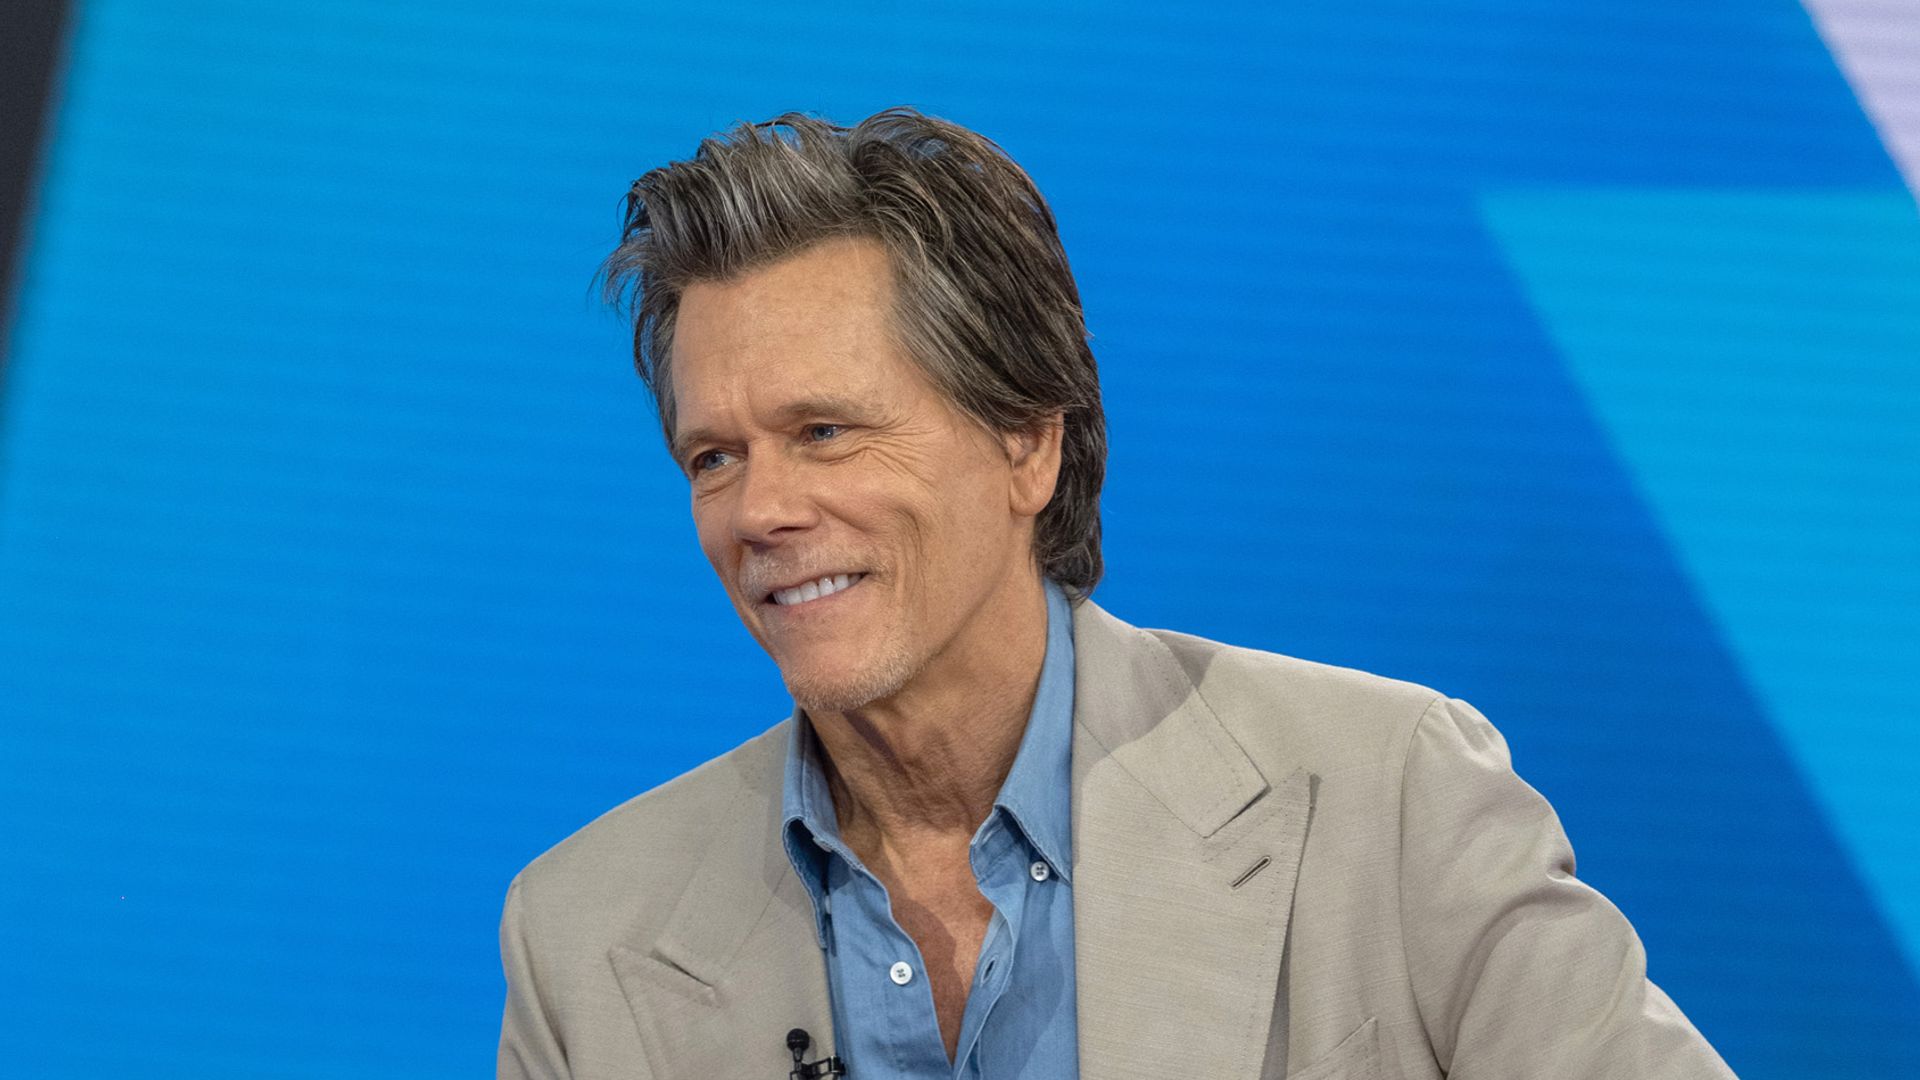 Kevin Bacon on Thursday, August 4, 2022 at the Today Show